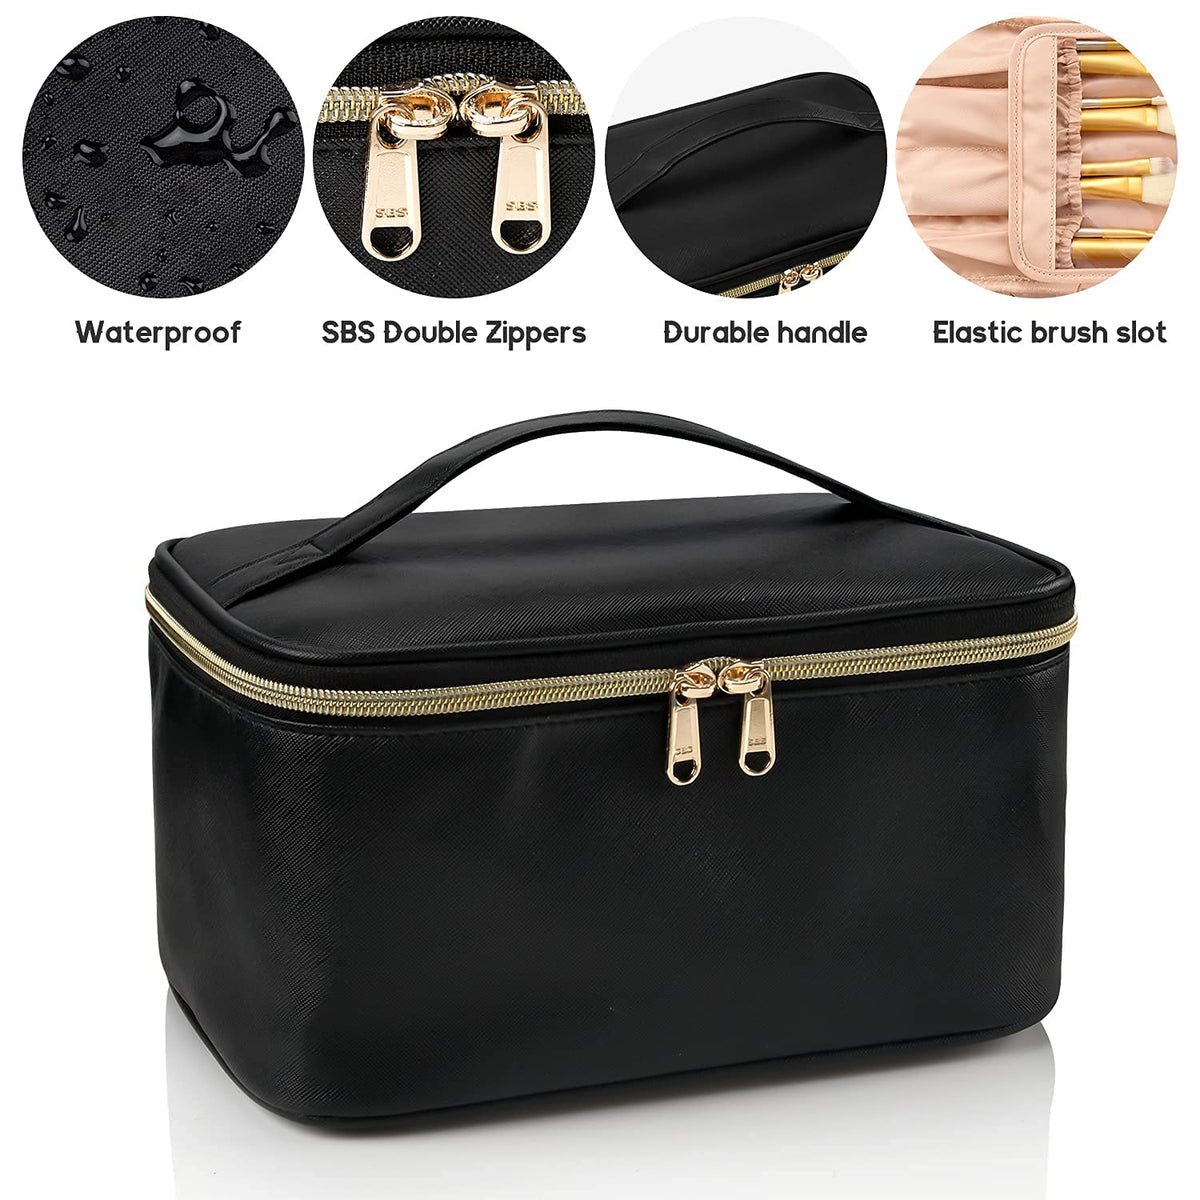  BOBOBOX Travel Cosmetic Bag Large Capacity Make Up Bag PU  Leather Waterproof Portable with Handle and Divider Multifunctional Bag  Makeup Accessories for Women (G-Brown) : Beauty & Personal Care